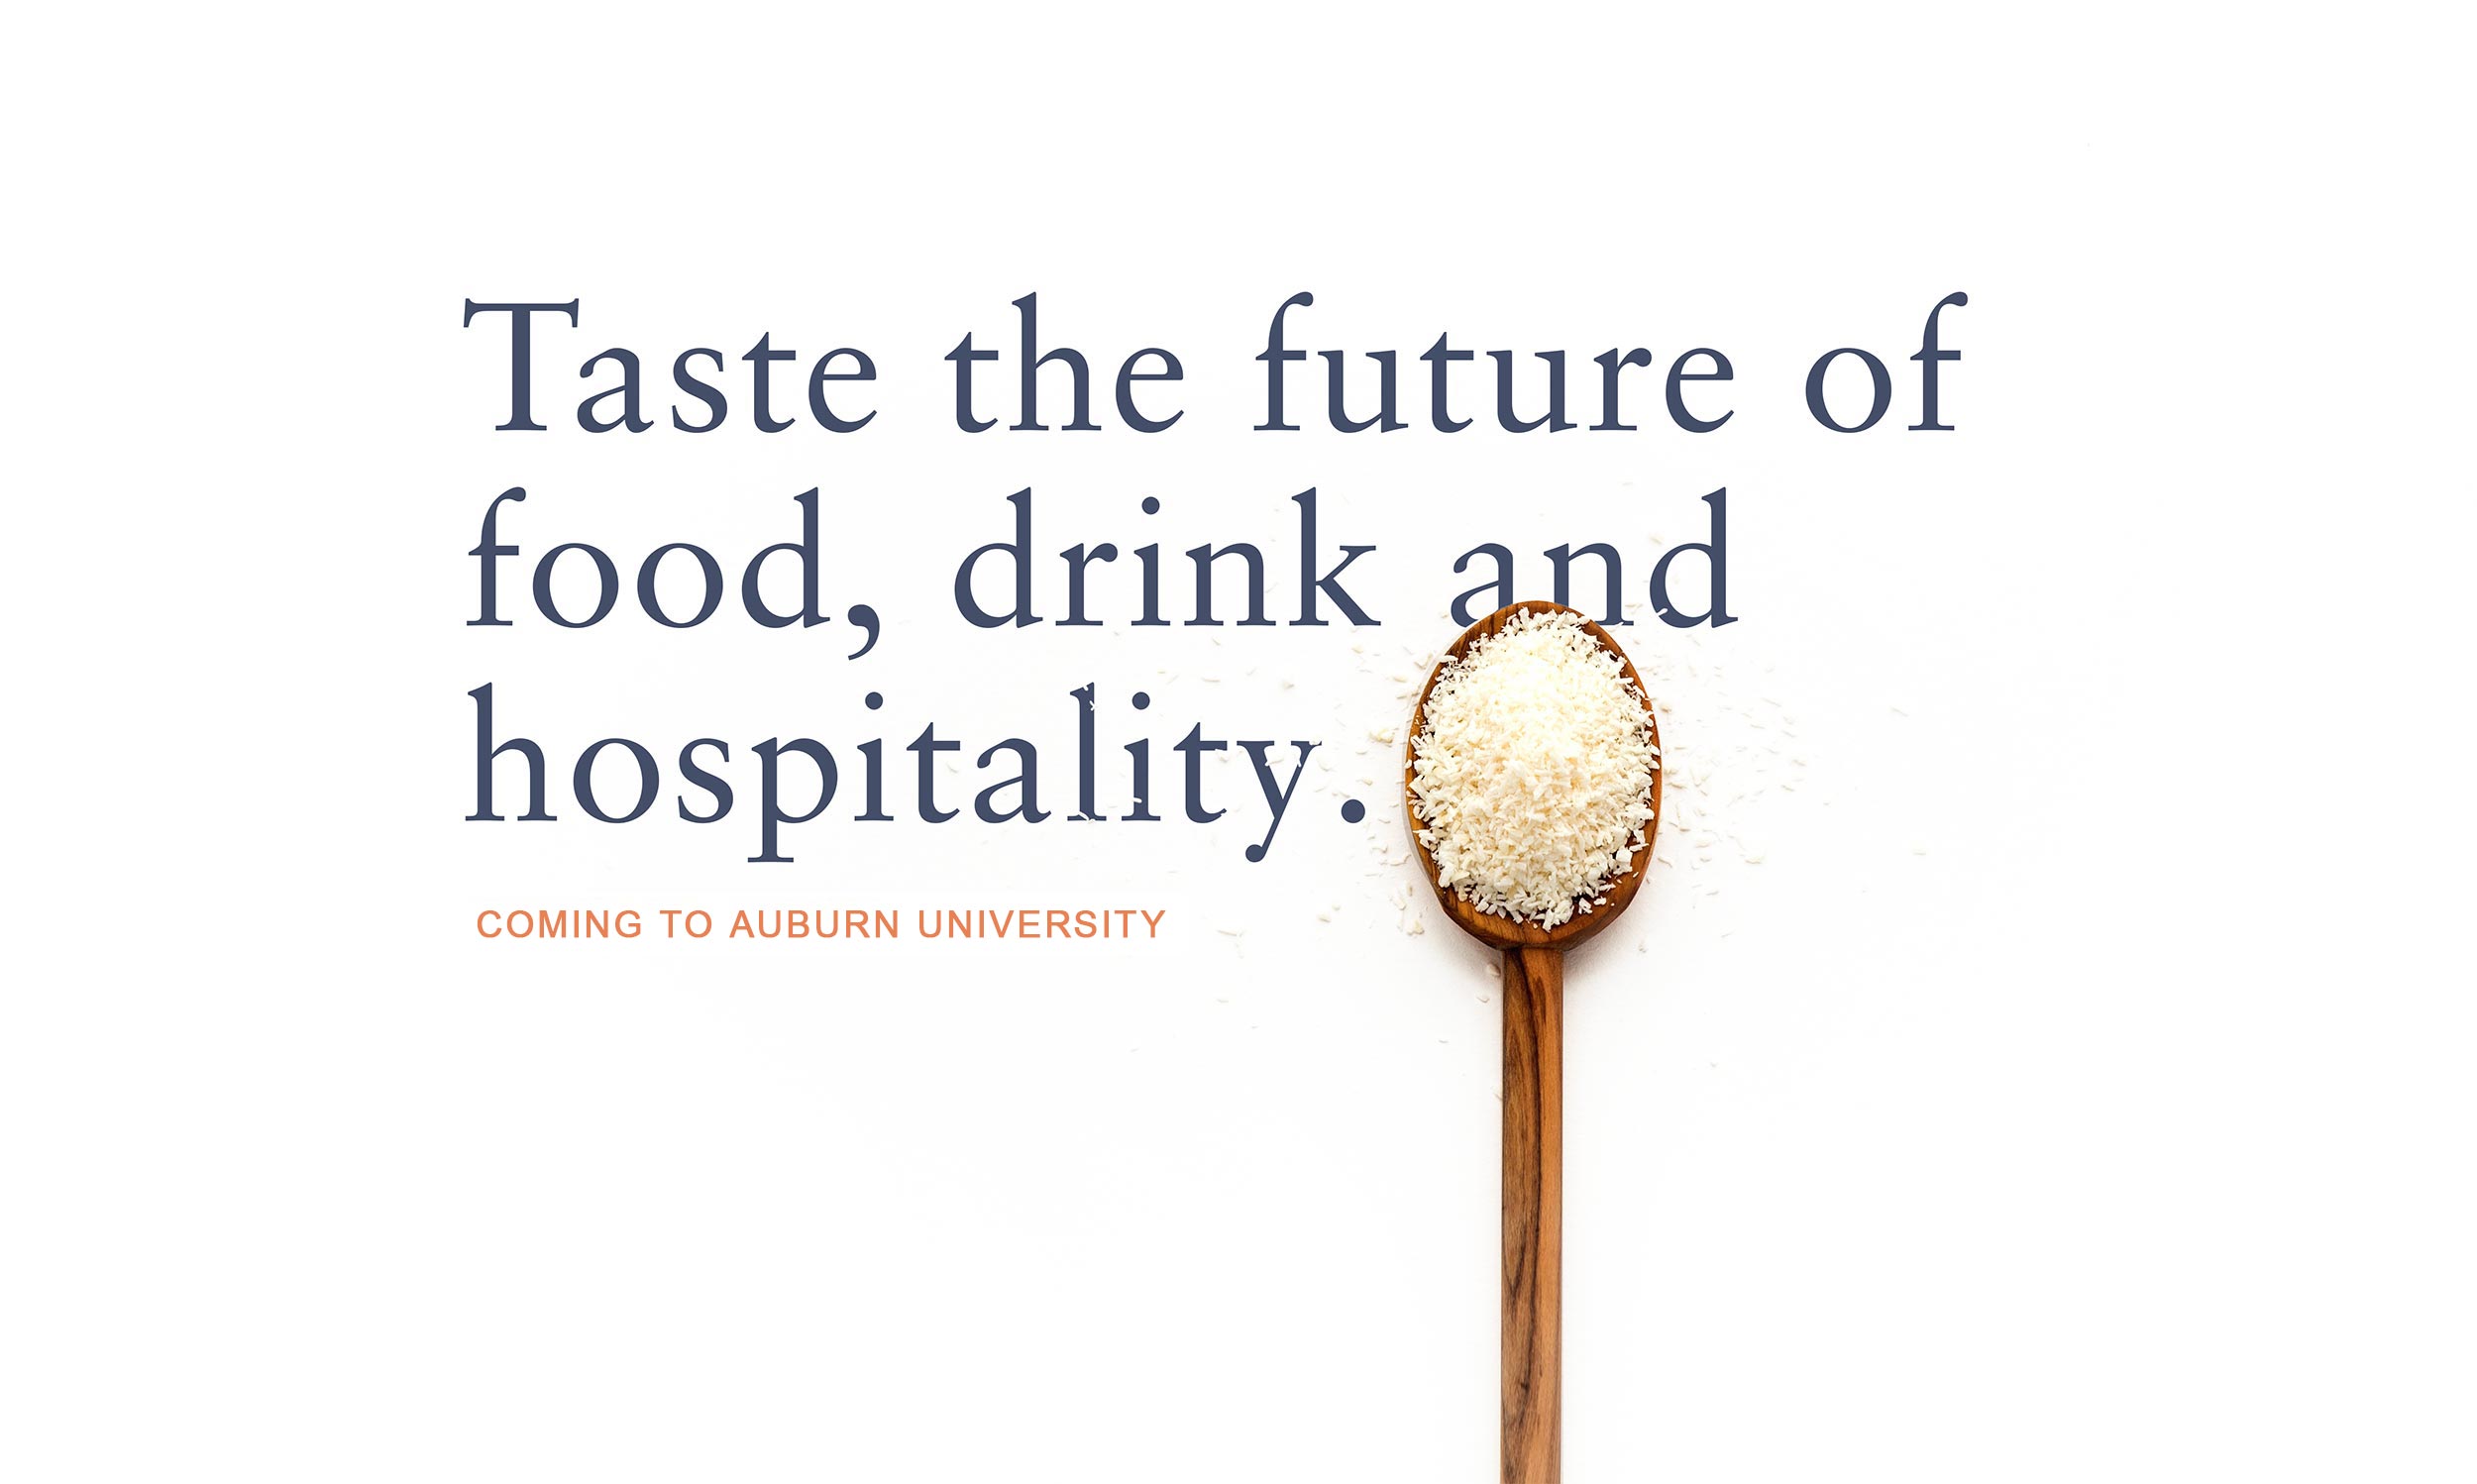 Taste the future of food, drink and hospitality.